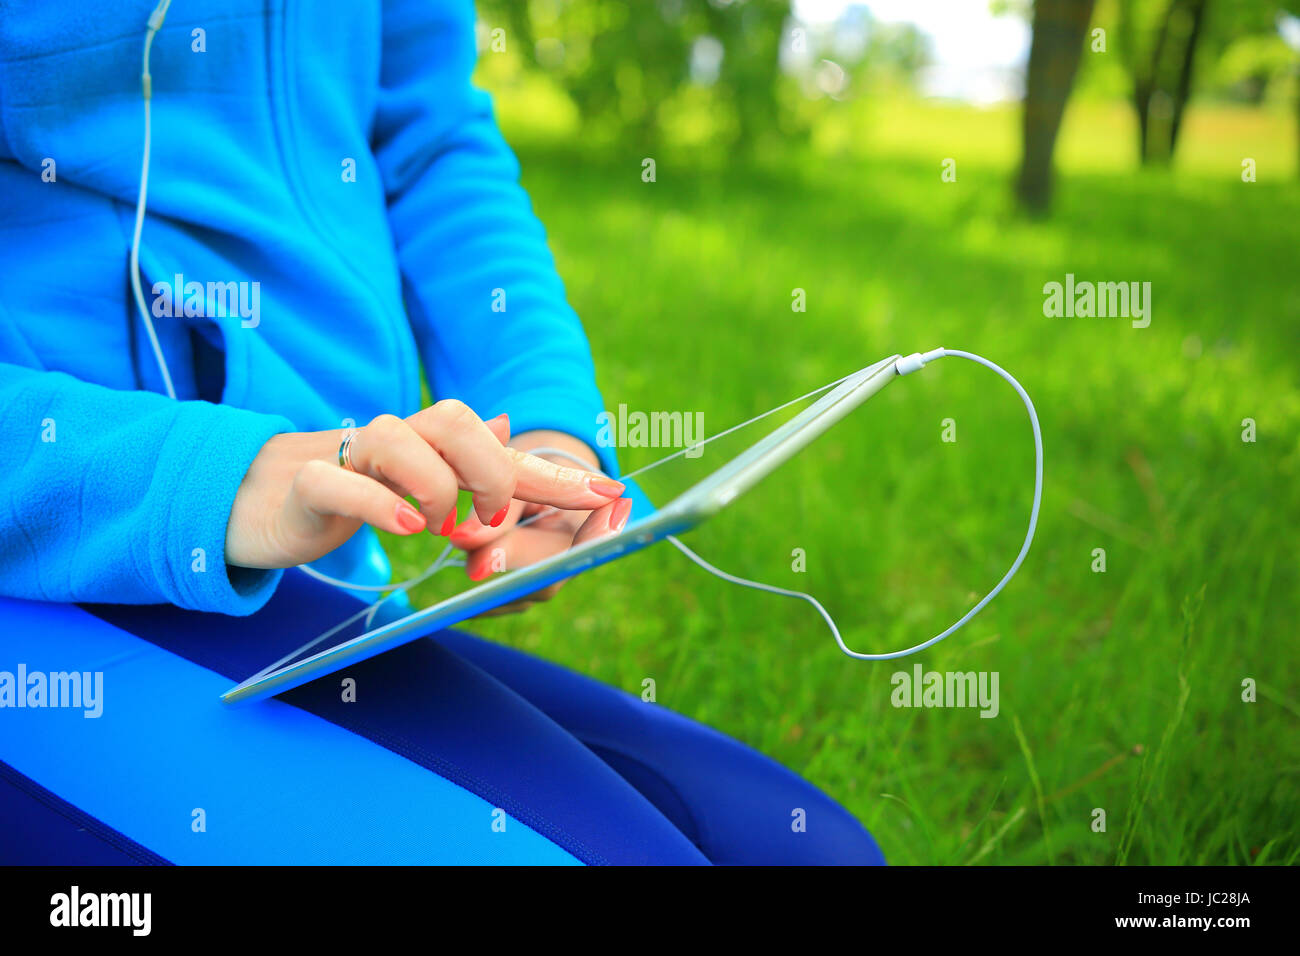 Hands on new tablet close-up. Girl choose music list on tablet in park. Stock Photo